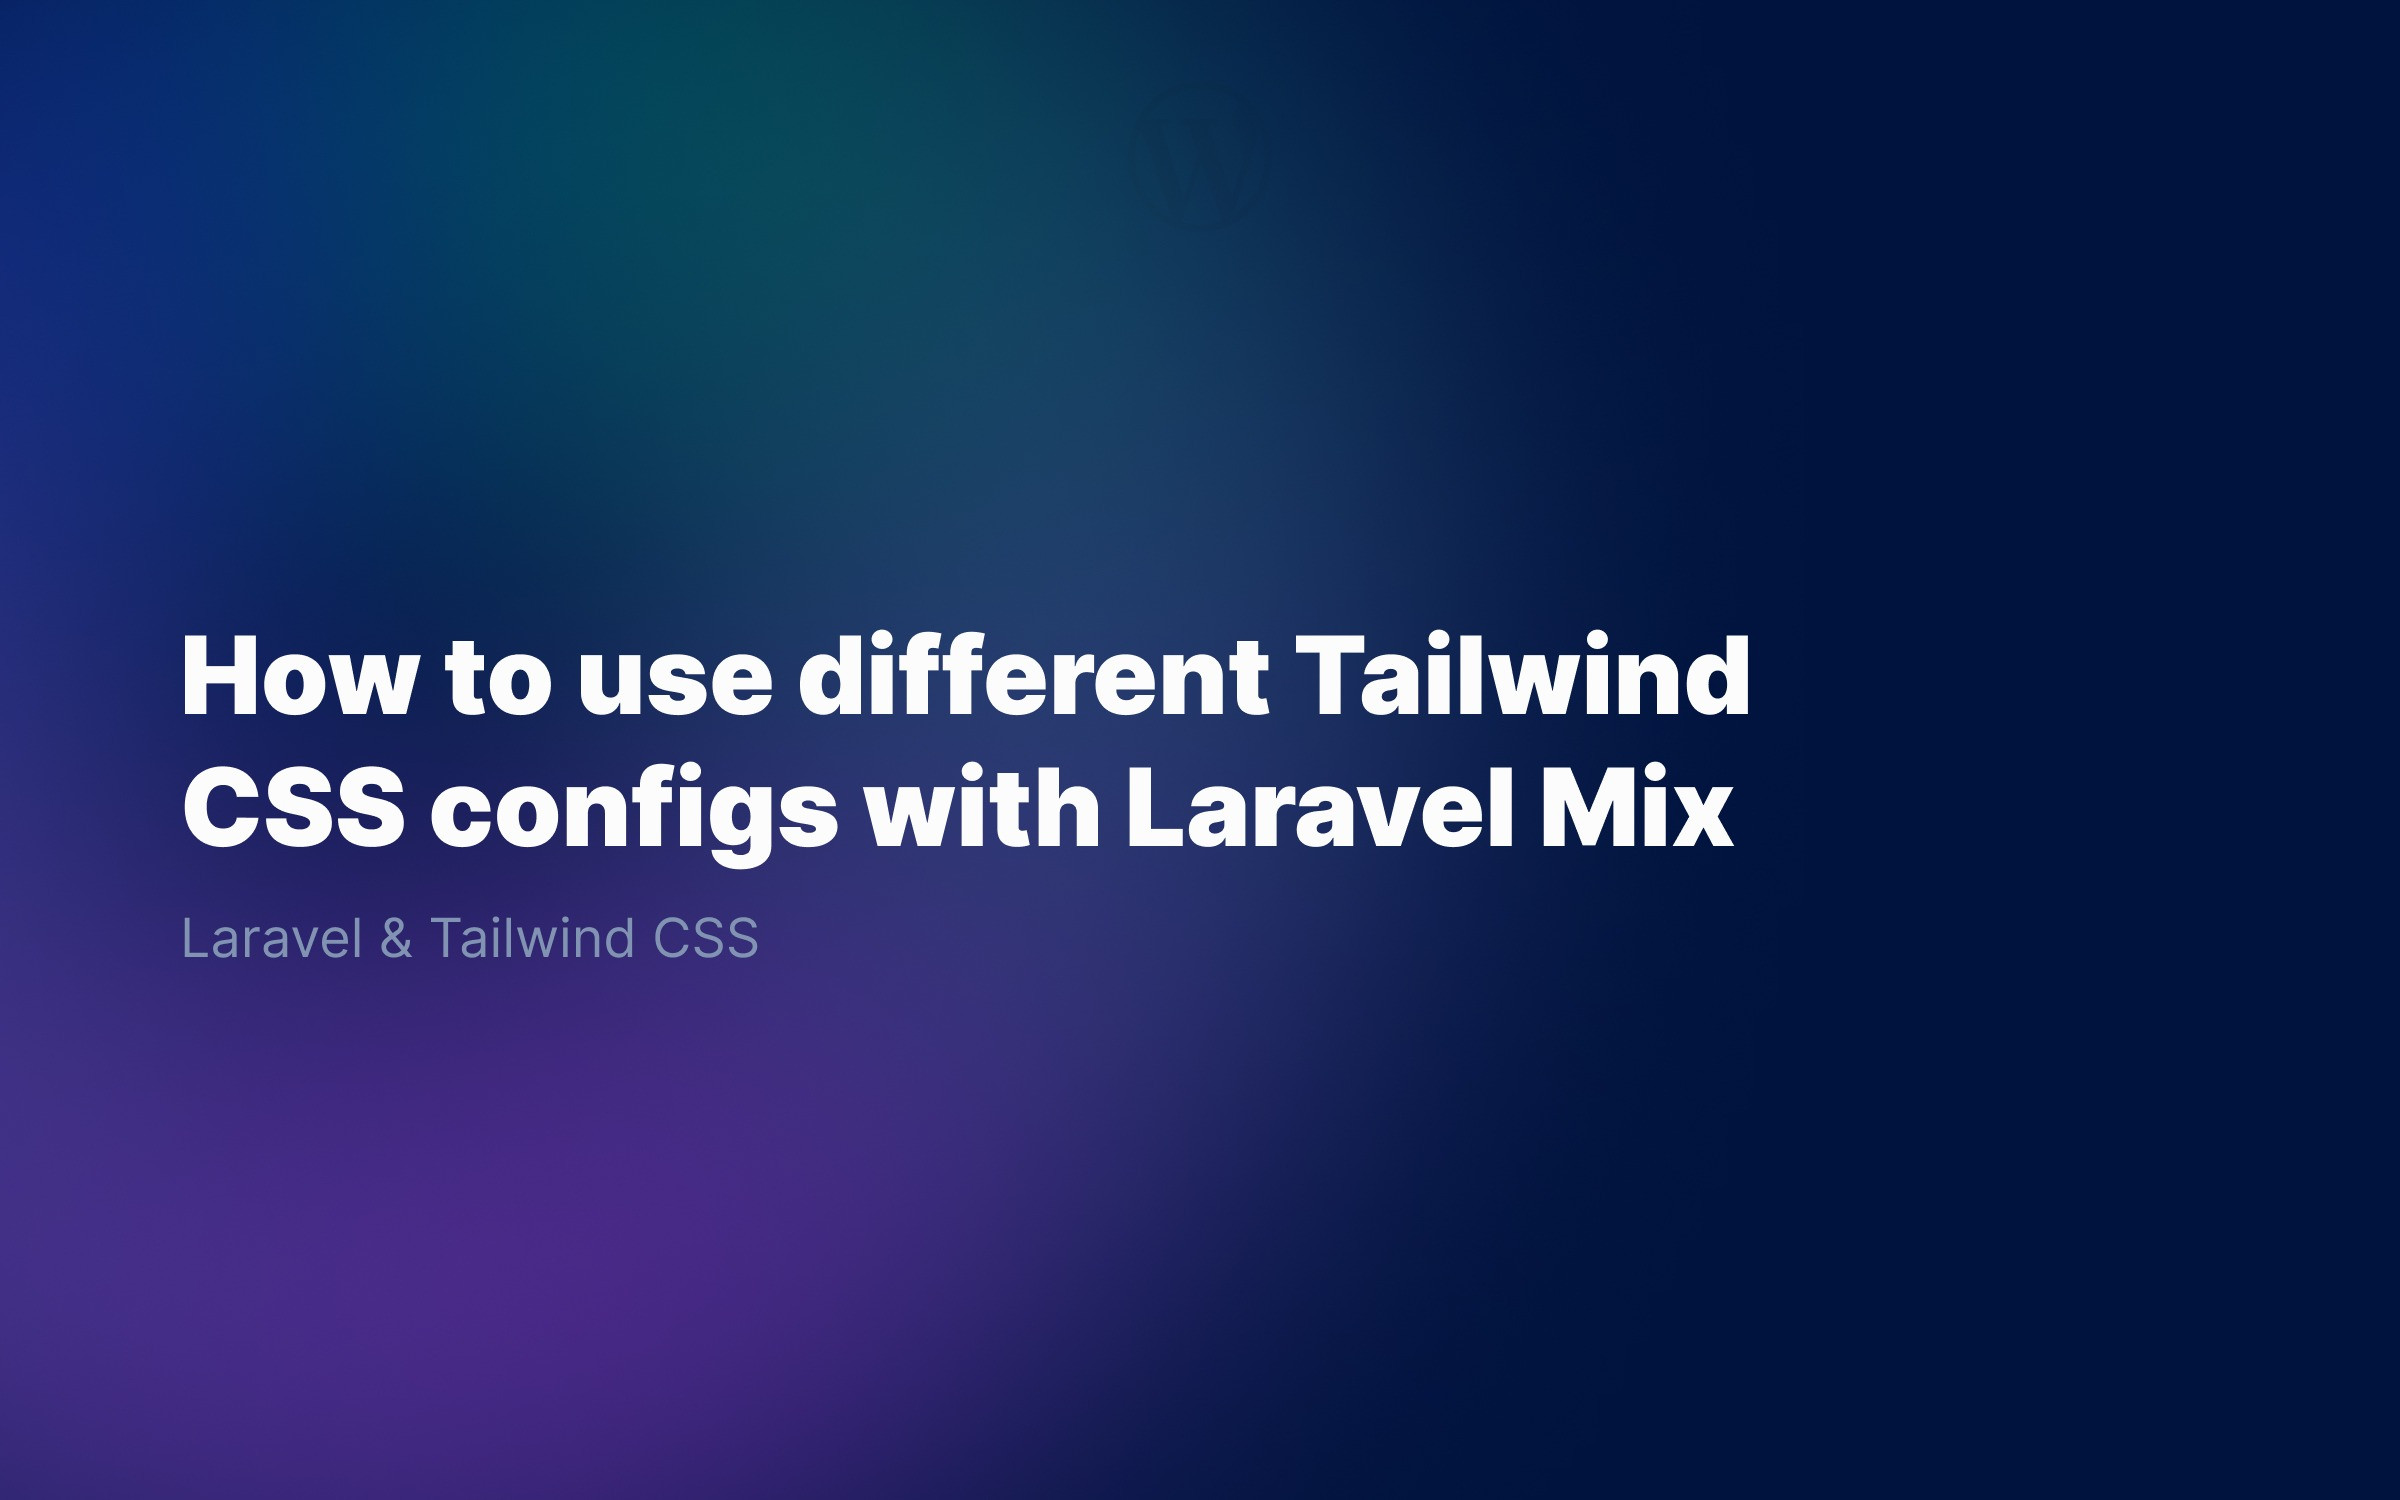 How to use different Tailwind CSS configs with Laravel Mix